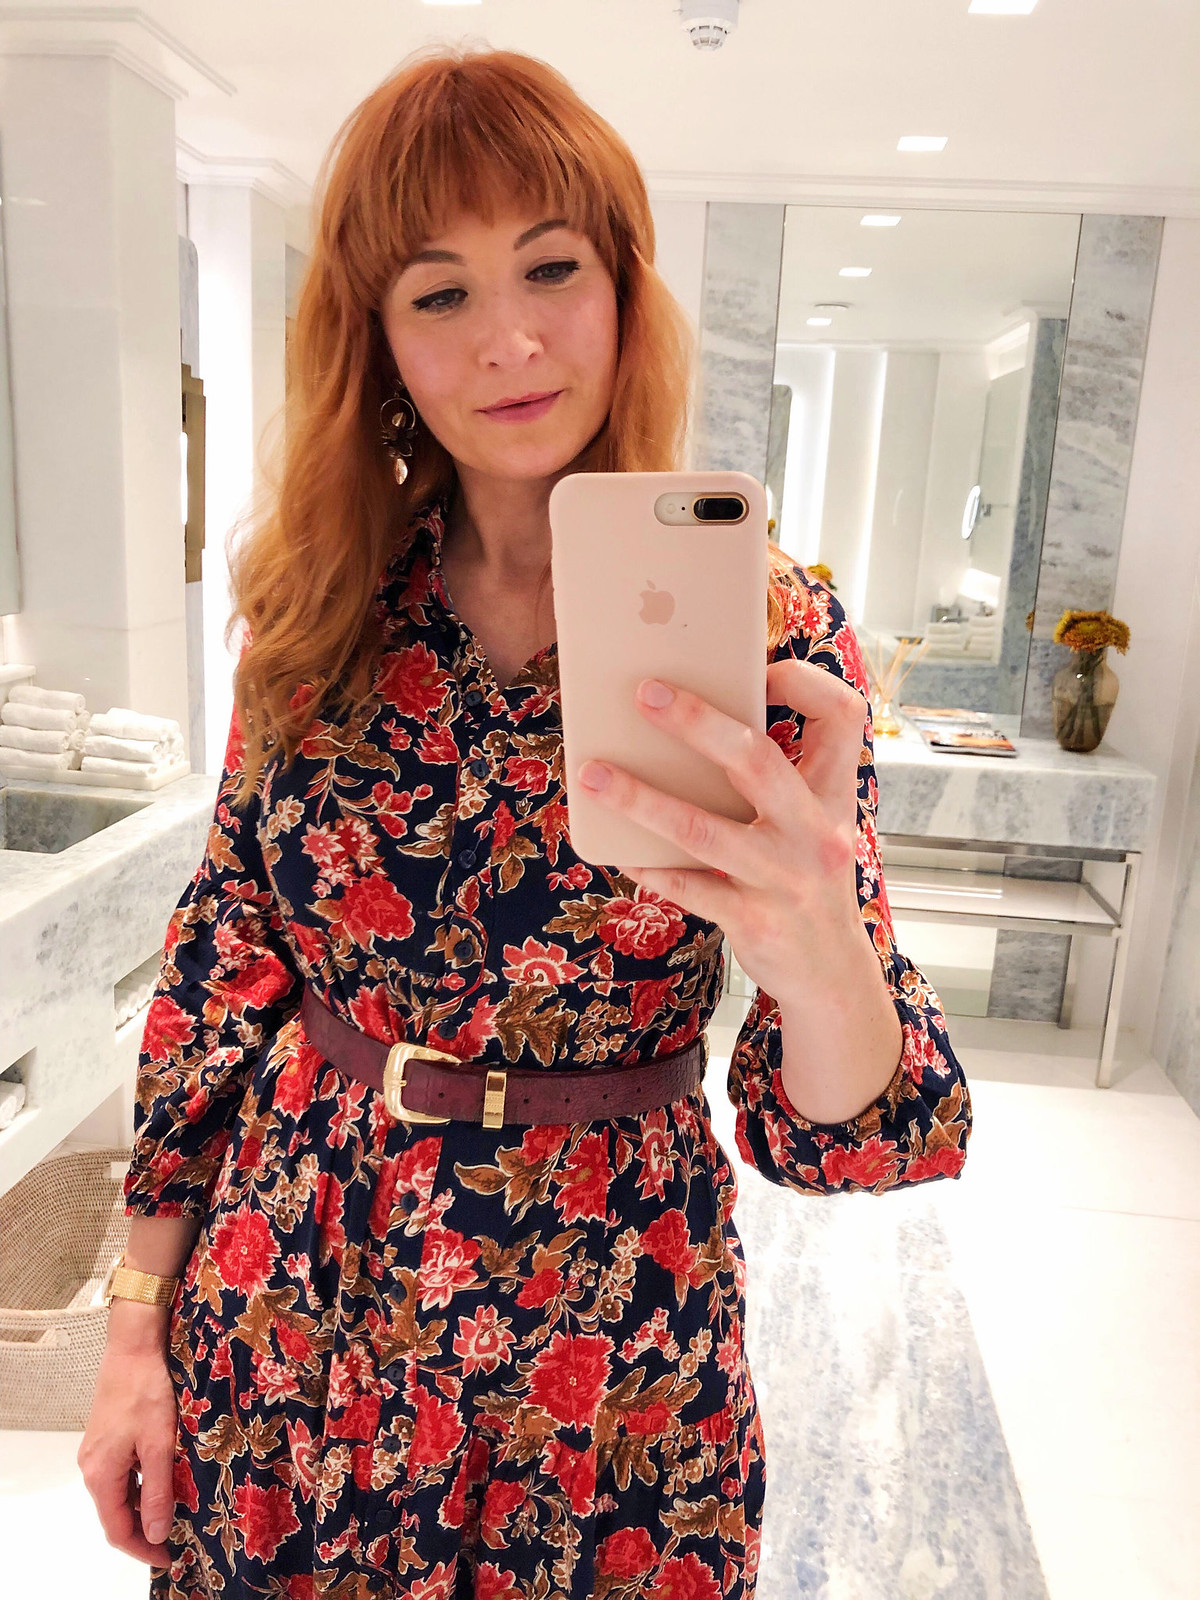 The Easiest, Quickest Autumn Outfit Formula Ever: floral midi dress, corduroy blazer and knee high boots | Not Dressed As Lamb, over 40 fashion